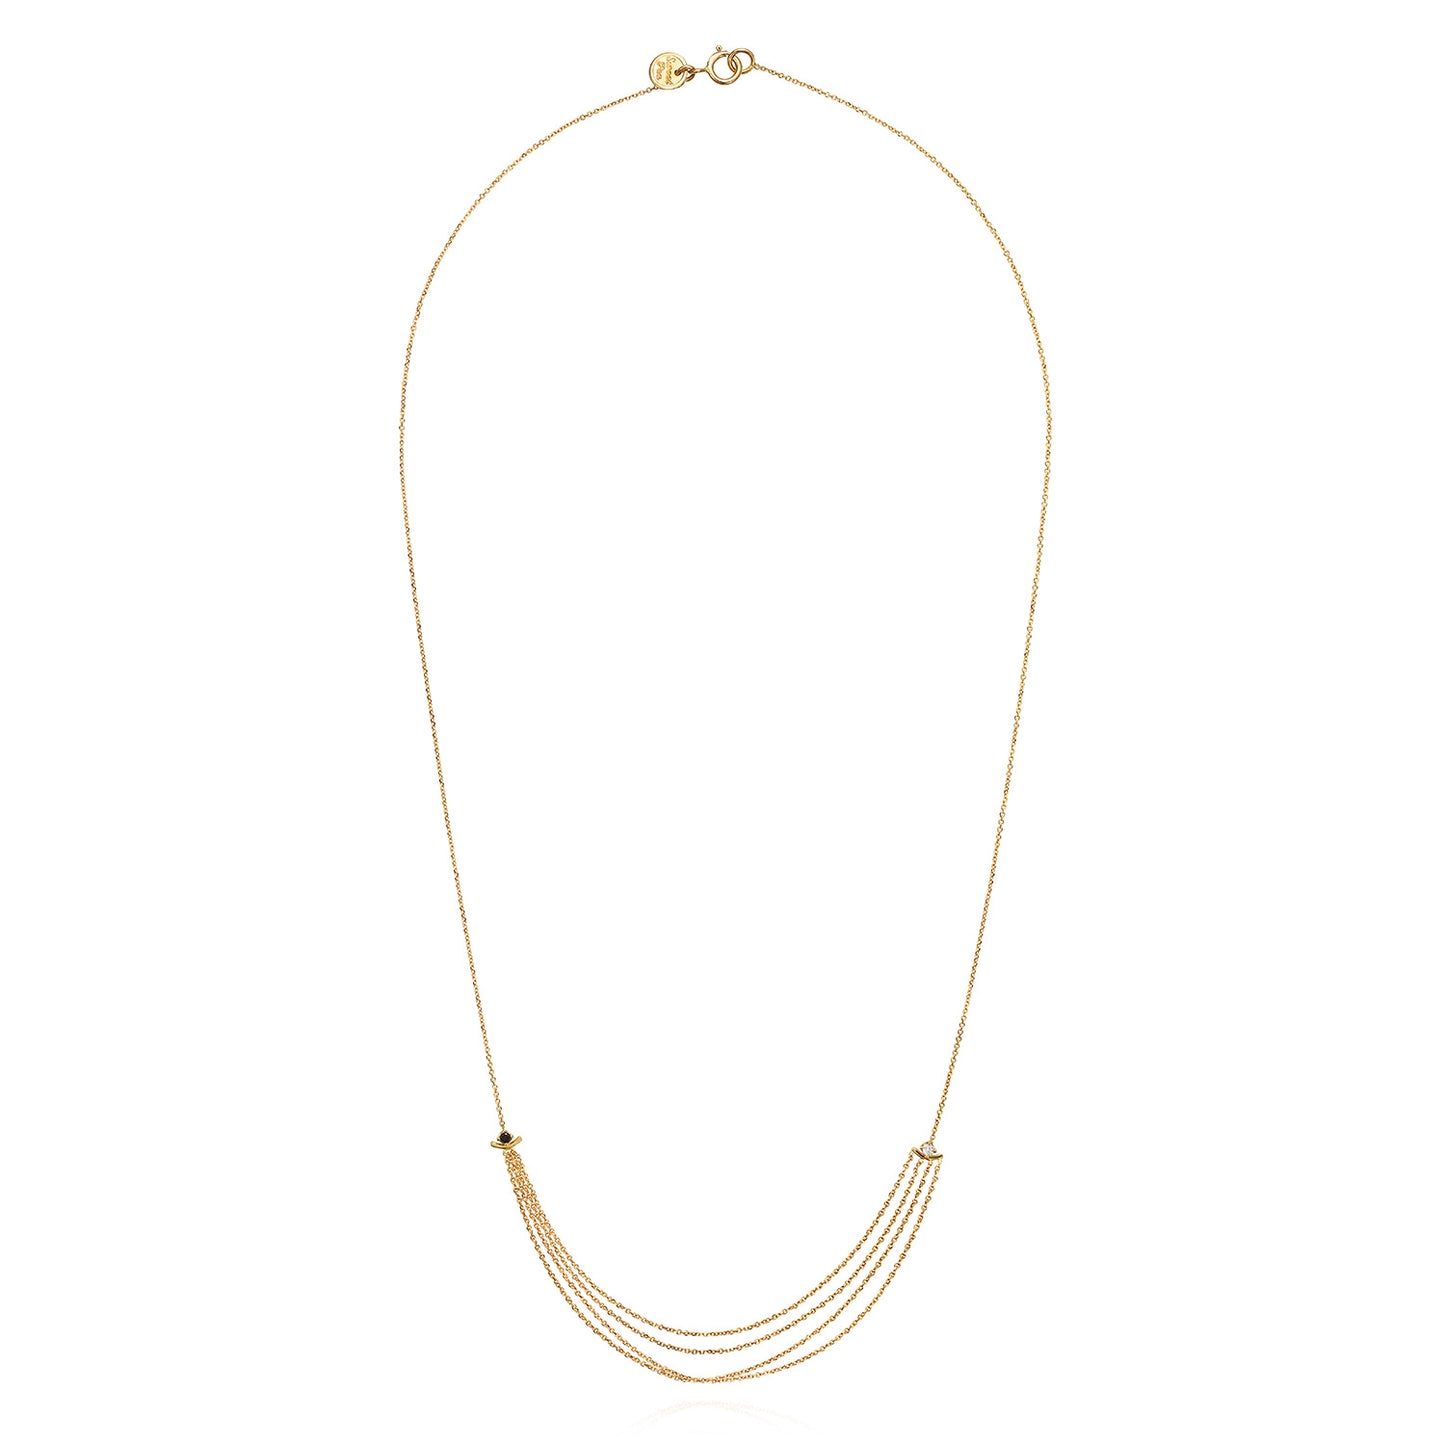 Sweet Pea 18ct yellow gold Nouveau Now black and white diamond layered necklace.